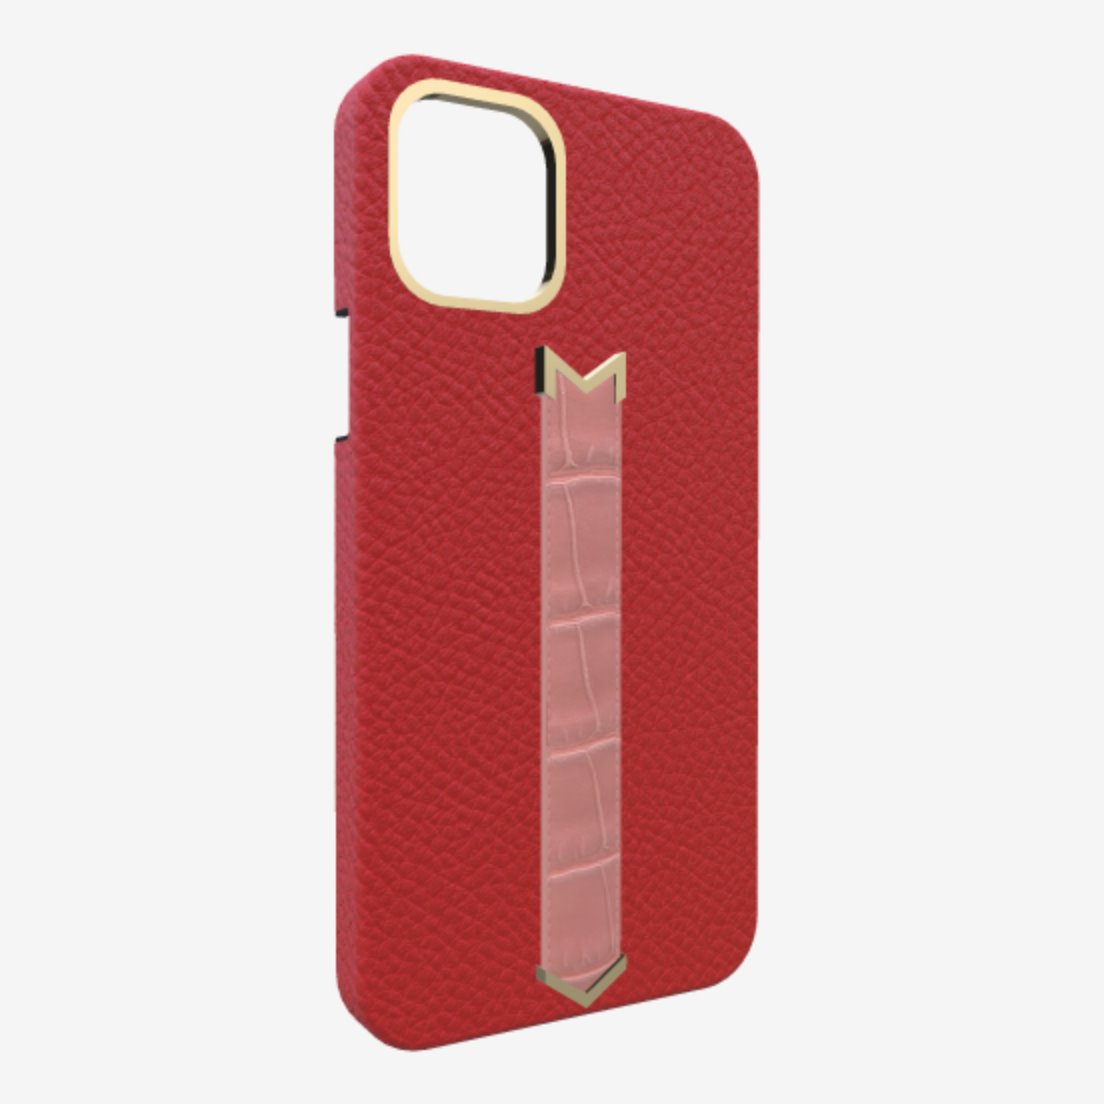 Gold Finger Strap Case for iPhone 13 Pro in Genuine Calfskin and Alligator Glamour Red Sweet Rose 